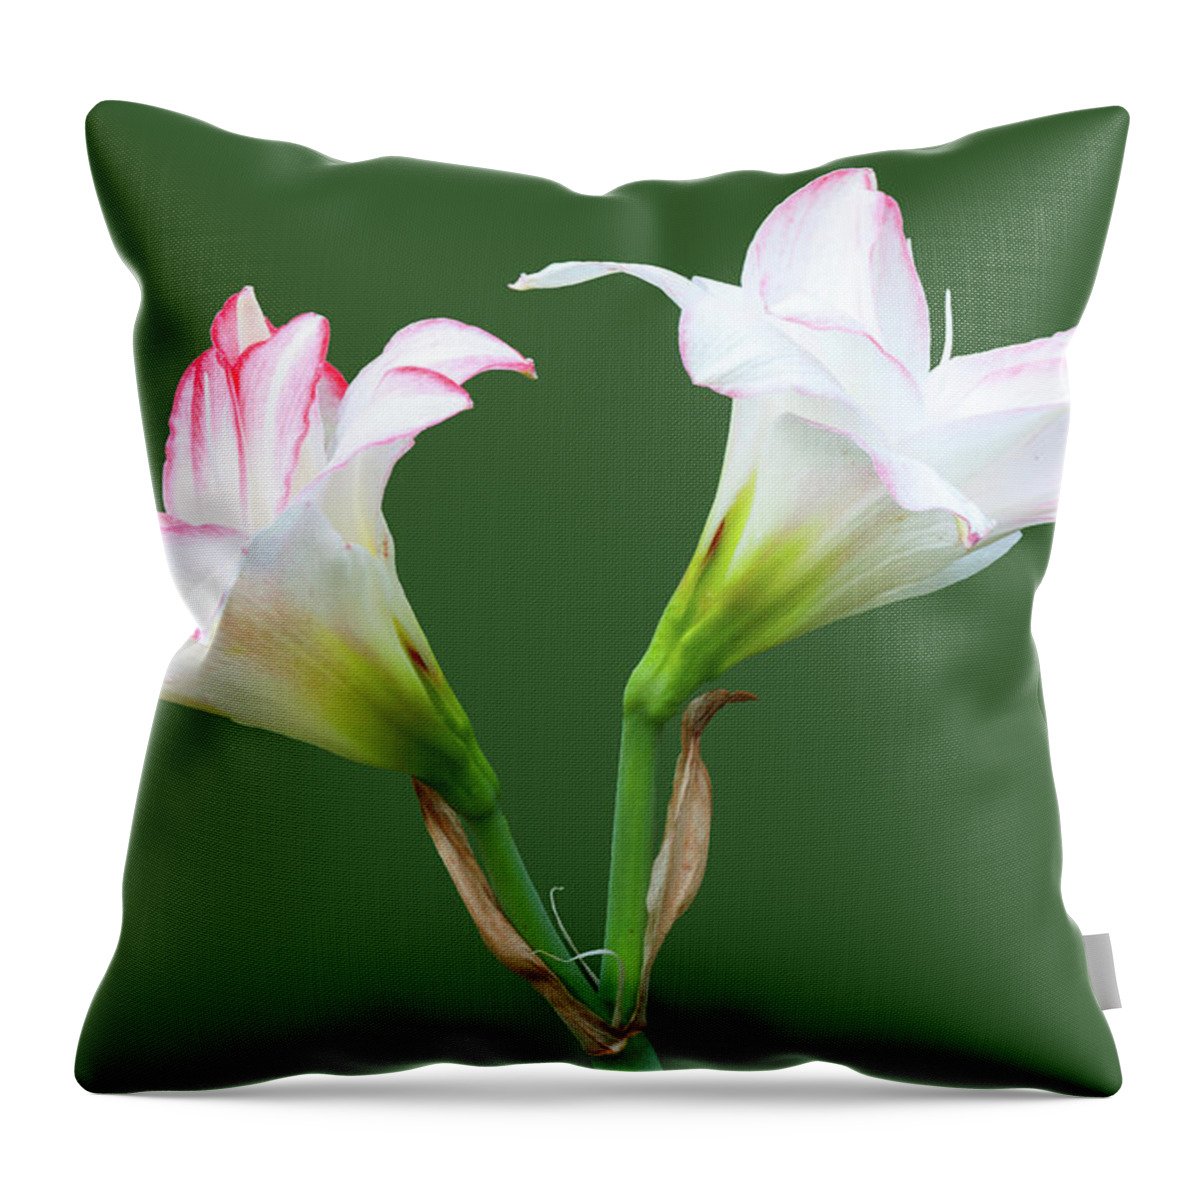 Spring Lilies Throw Pillow featuring the photograph Easter Lilies by Ram Vasudev